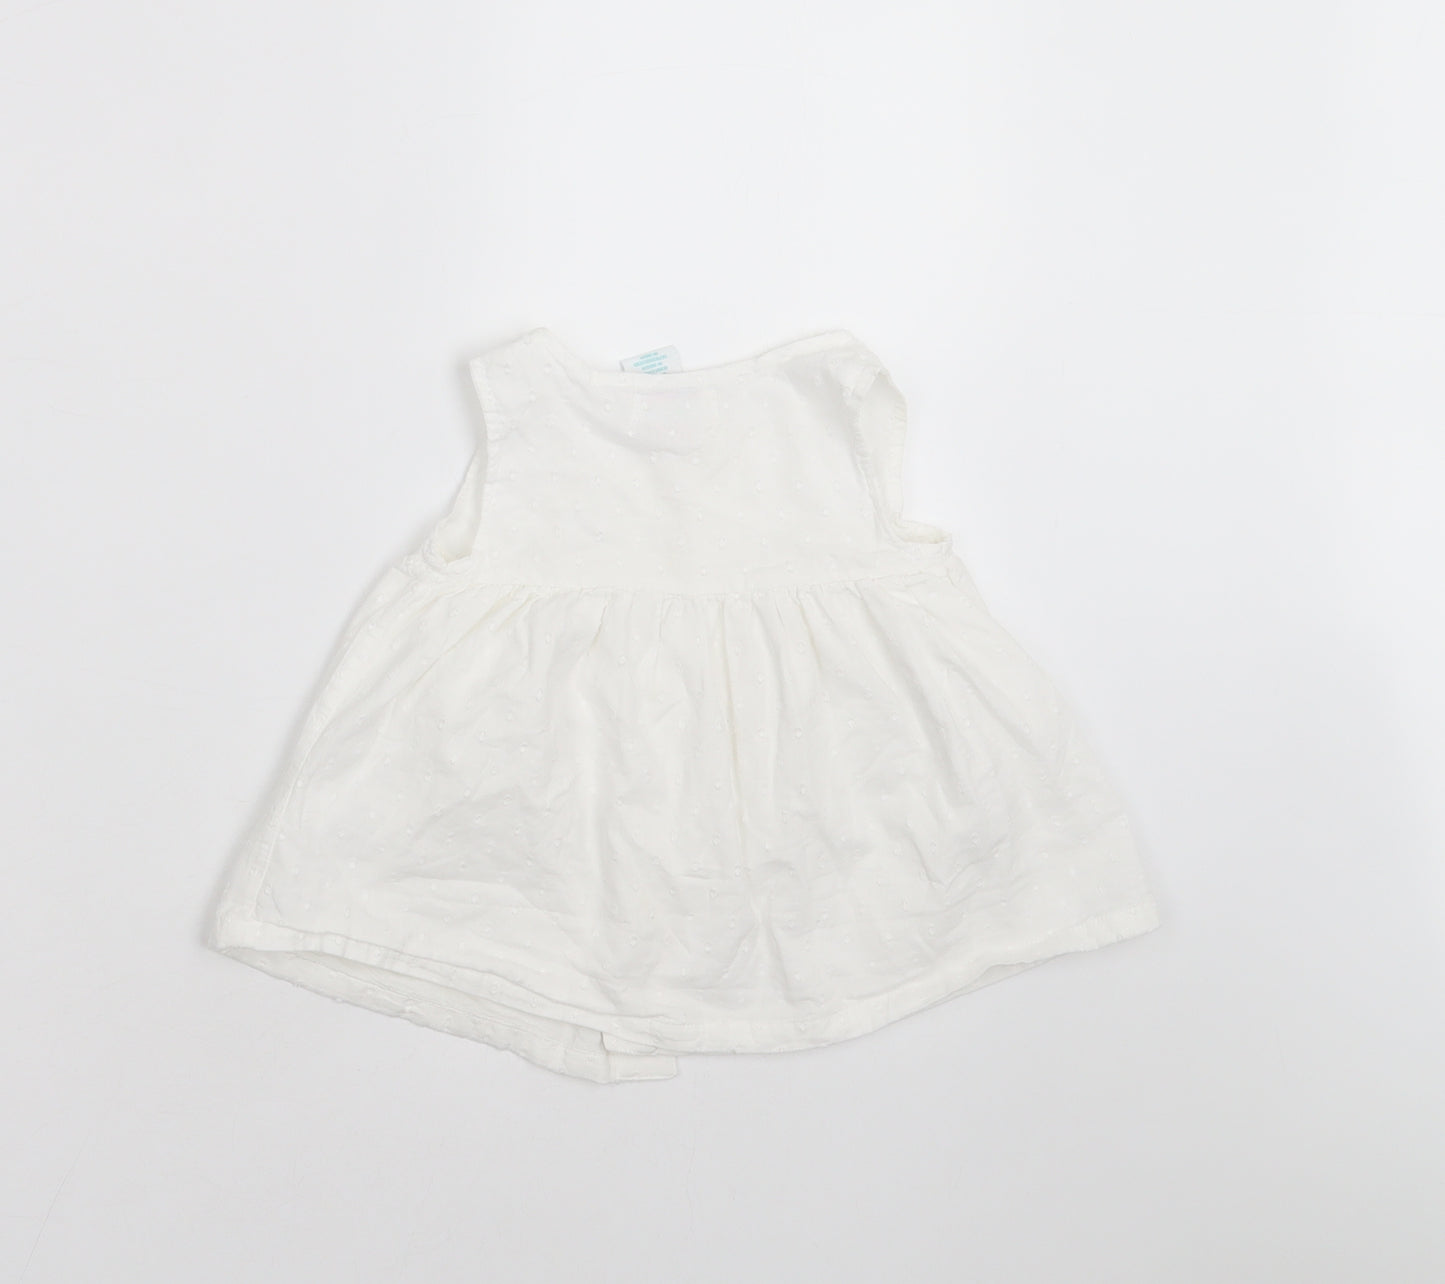 Maggie & Zoe Girls White   Basic Blouse Size 12-18 Months  - dotted pattern